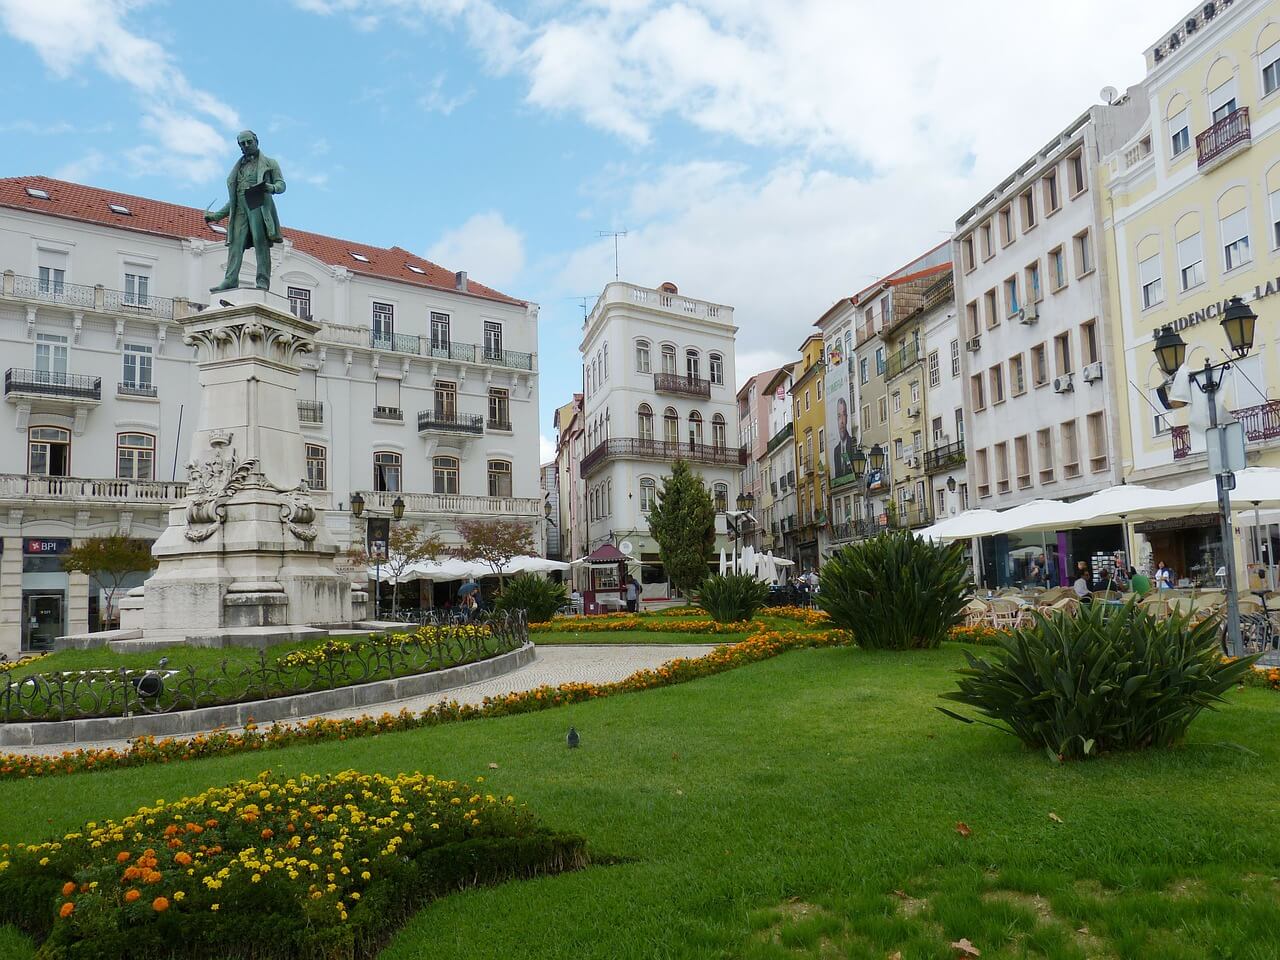 White buildings in Portugal as one of the picturesque locations in Europe